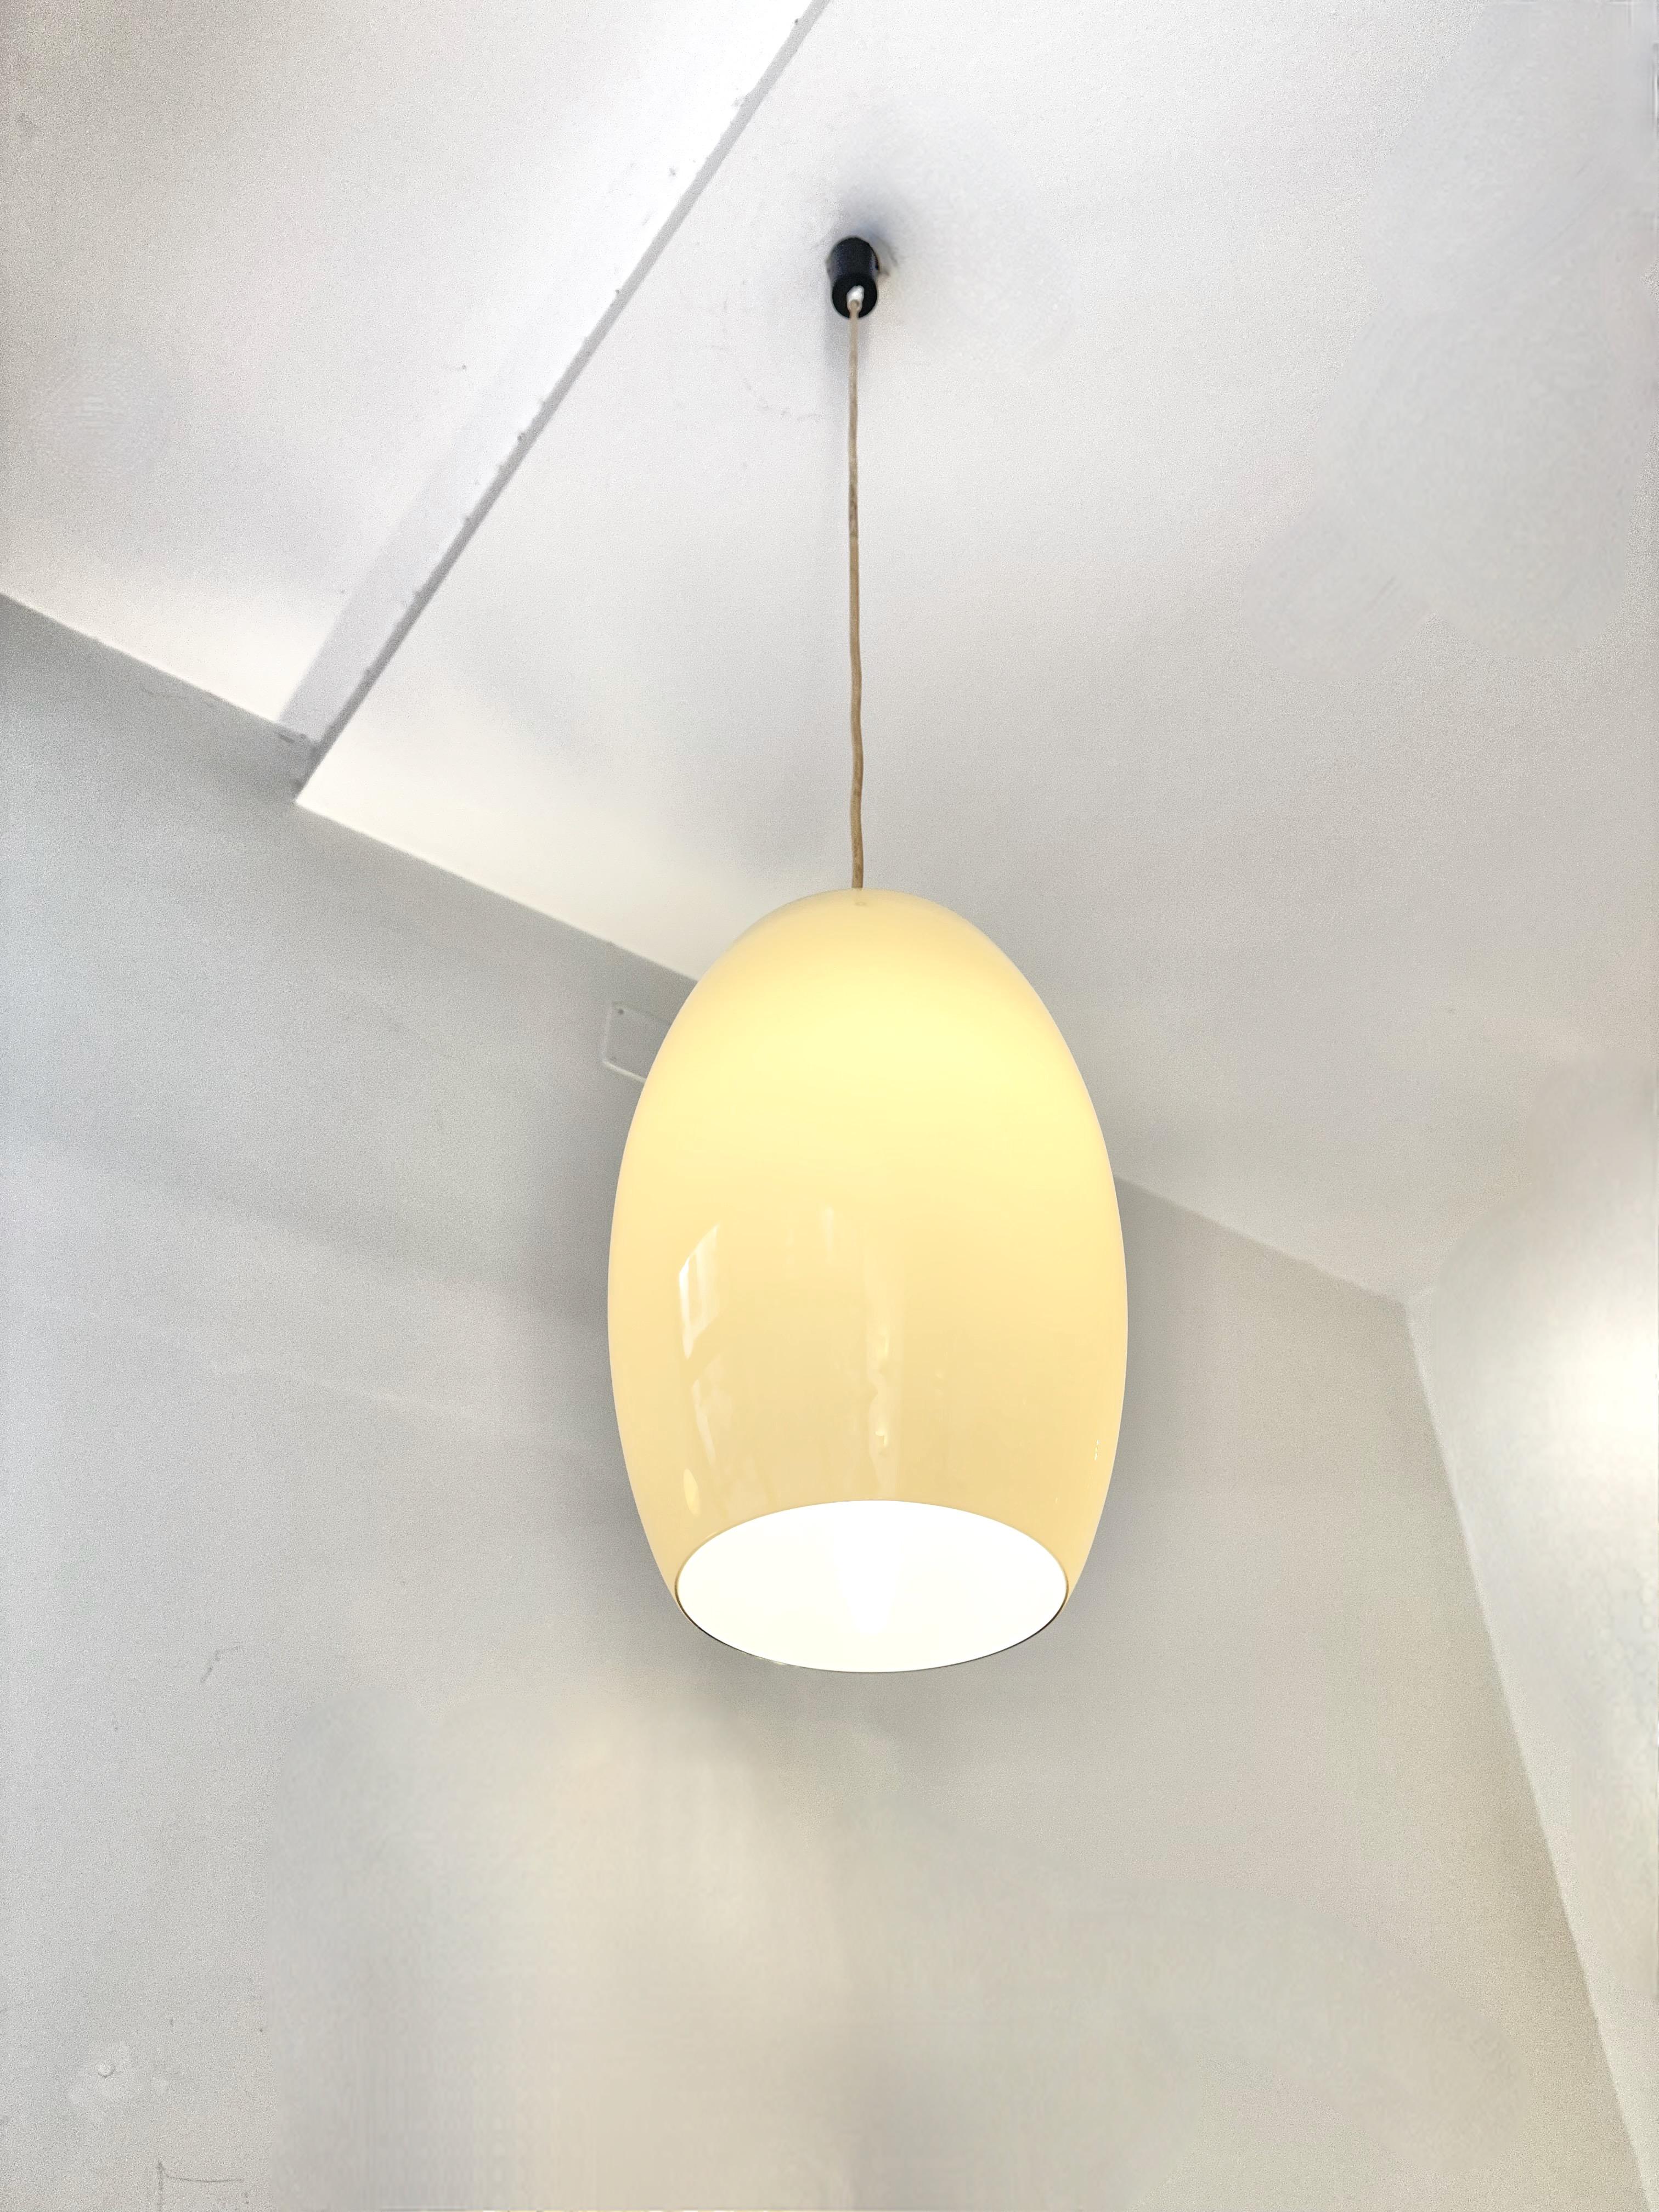 A rare Murano blown glass pendant light designed by made by Gino Vistosi.
Excellent condition.